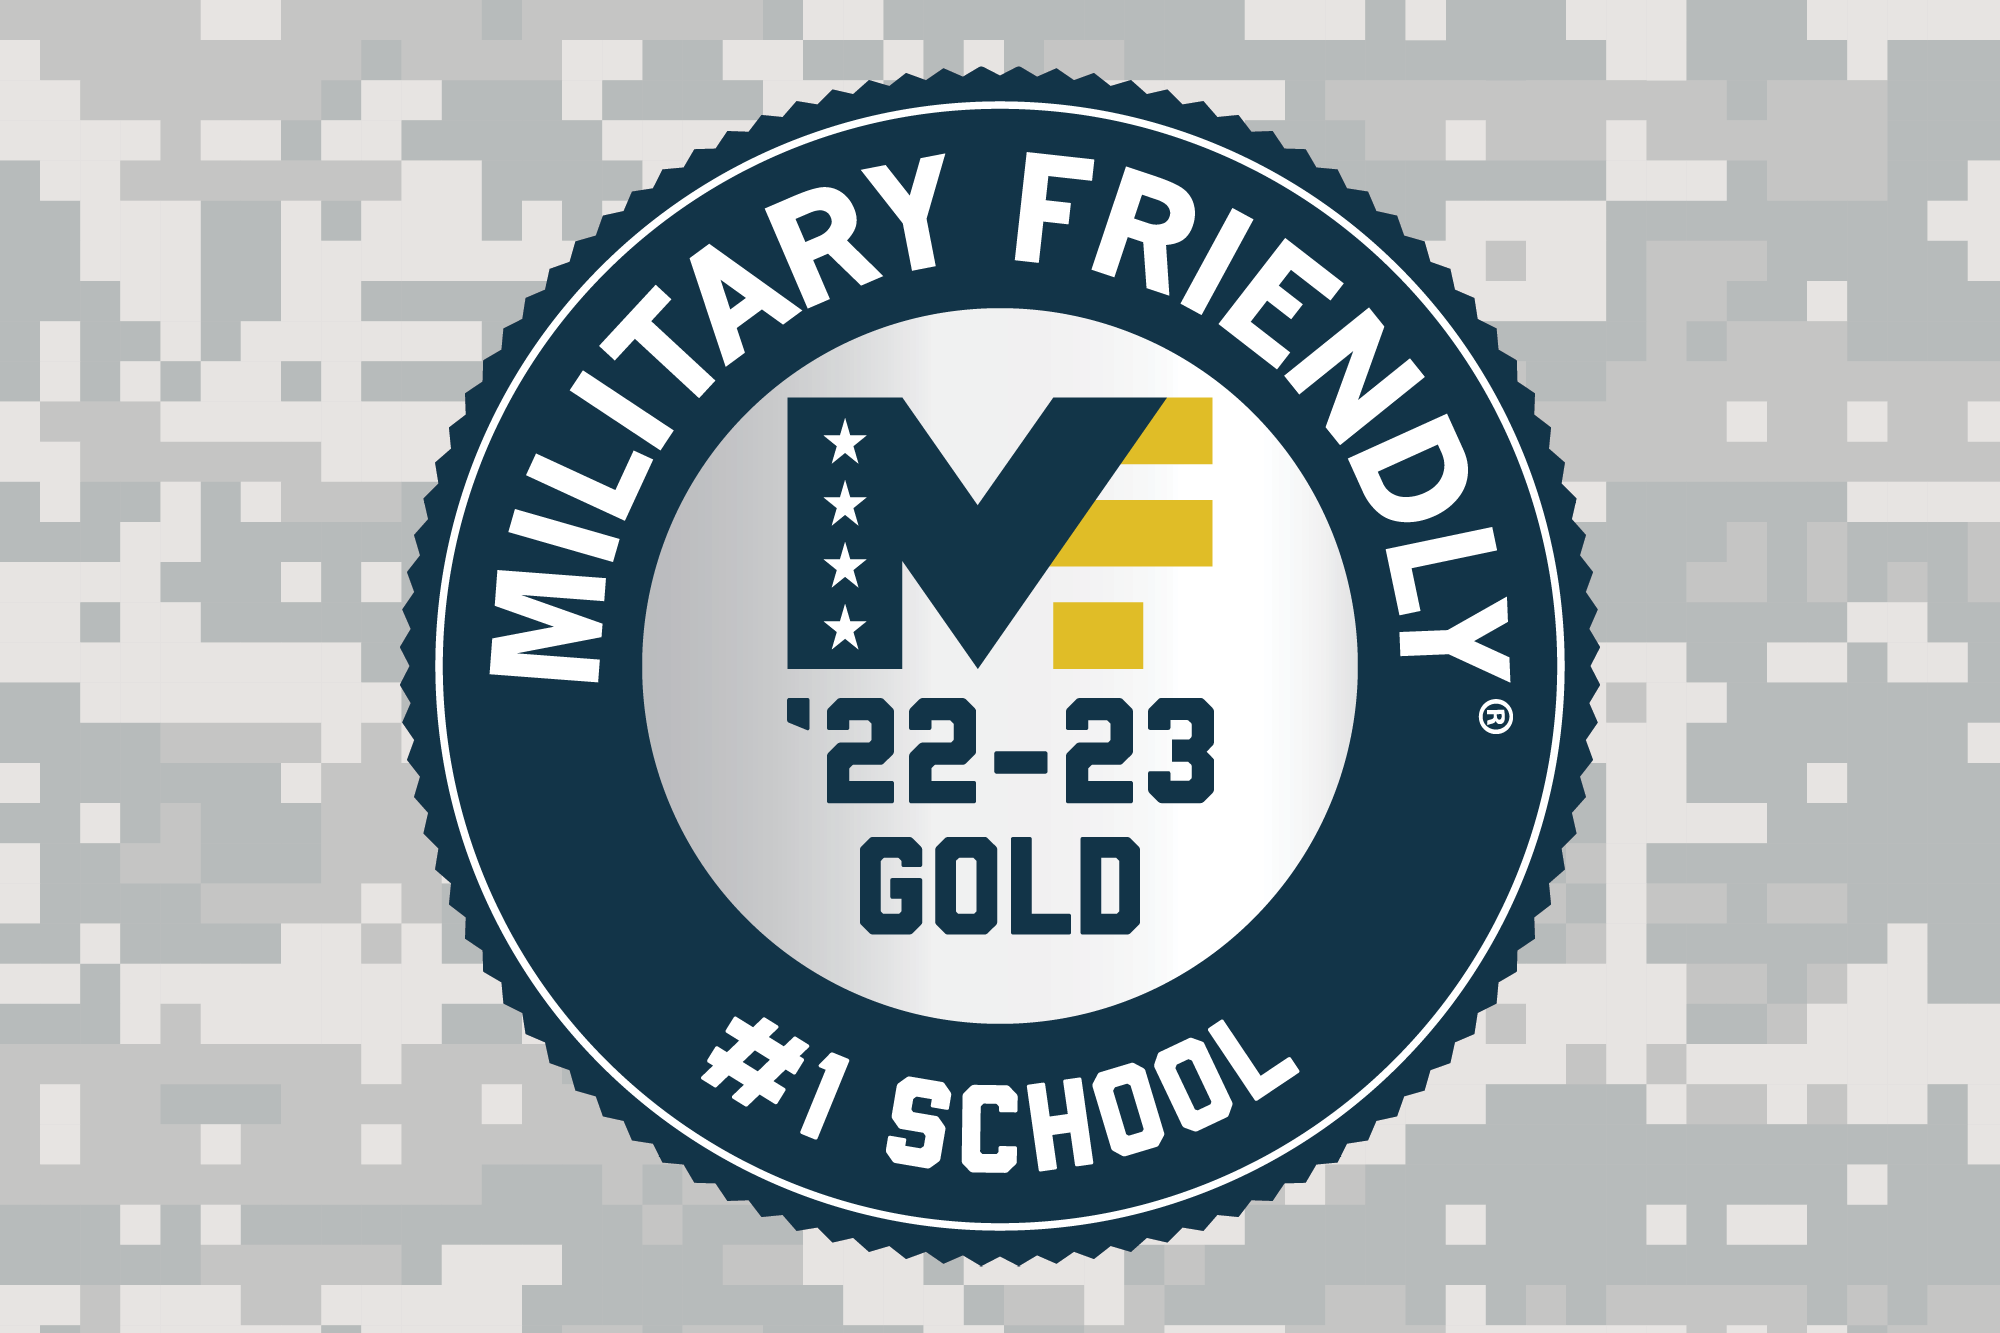 Image of Military Friendly #1 School graphic.